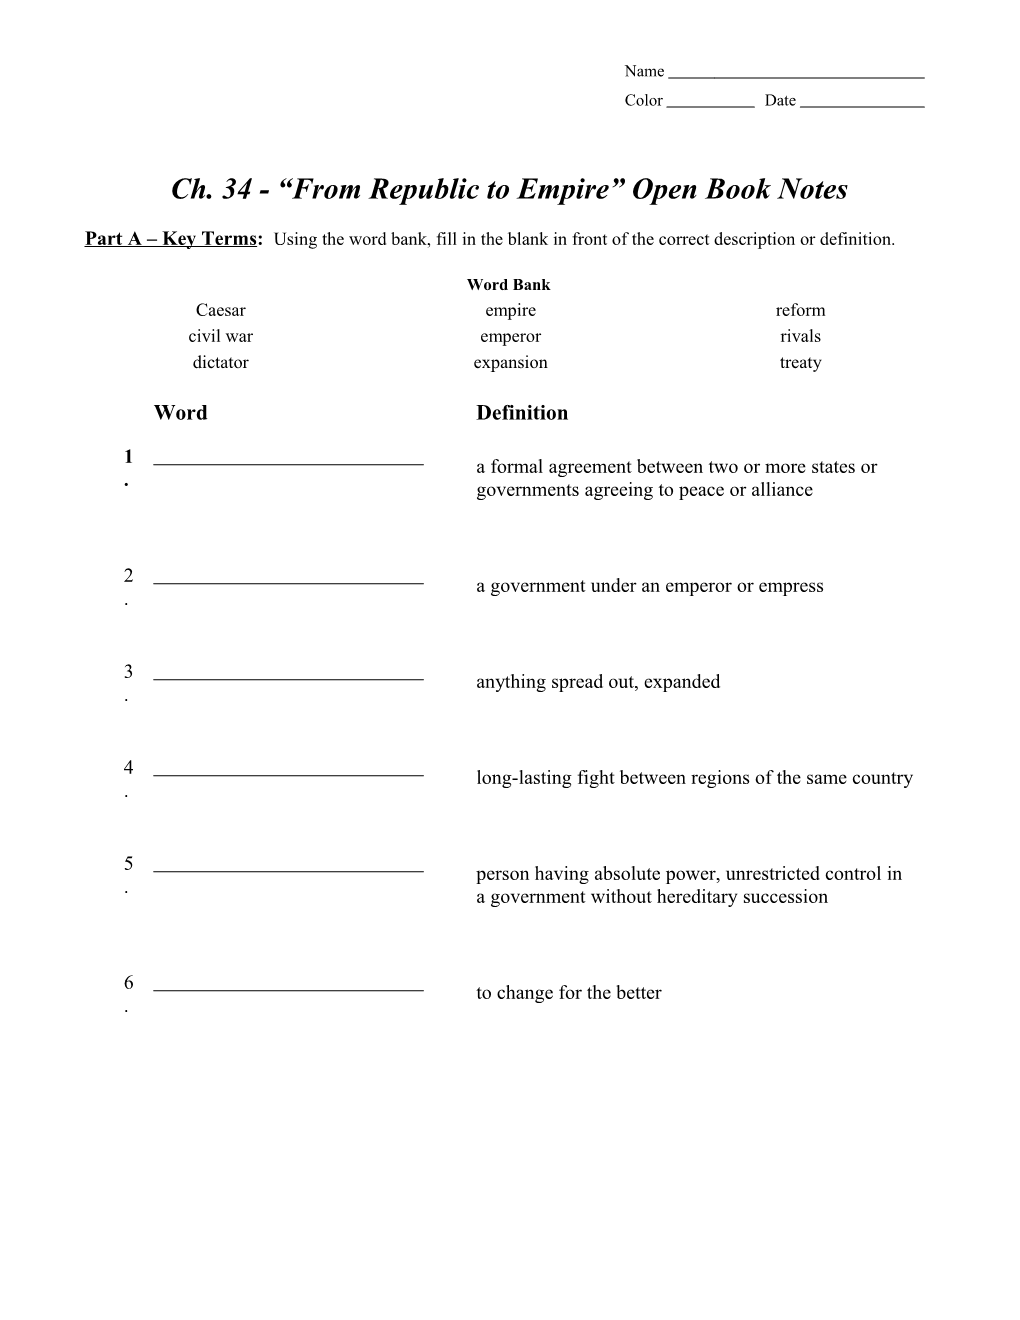 Ch. 34 - from Republic to Empire Open Book Notes